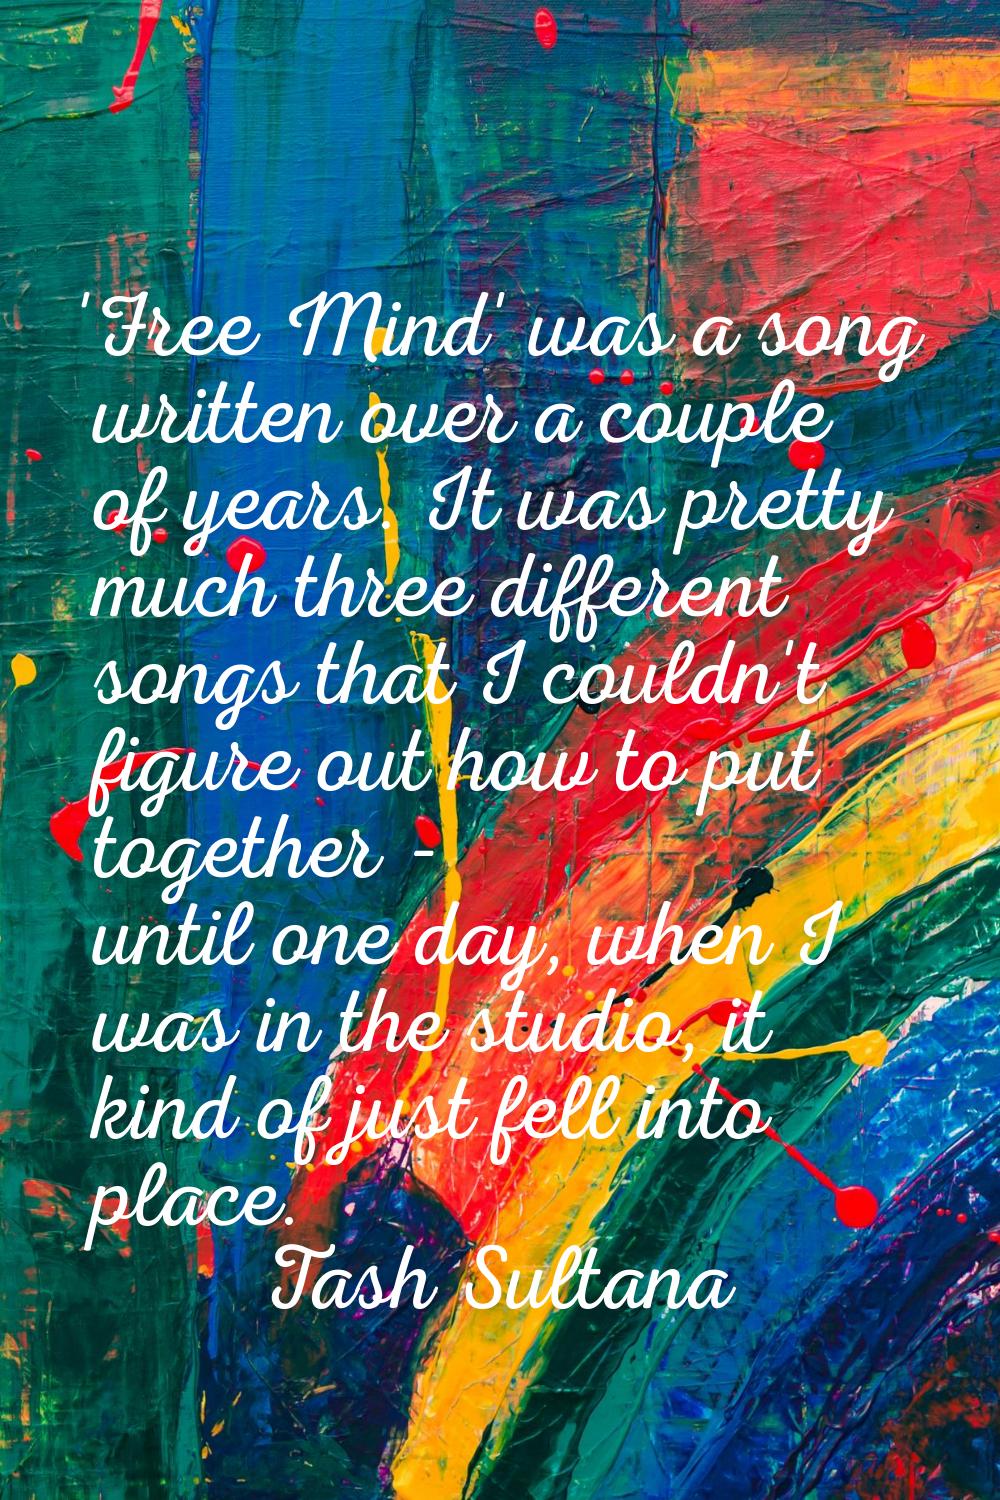 'Free Mind' was a song written over a couple of years. It was pretty much three different songs tha